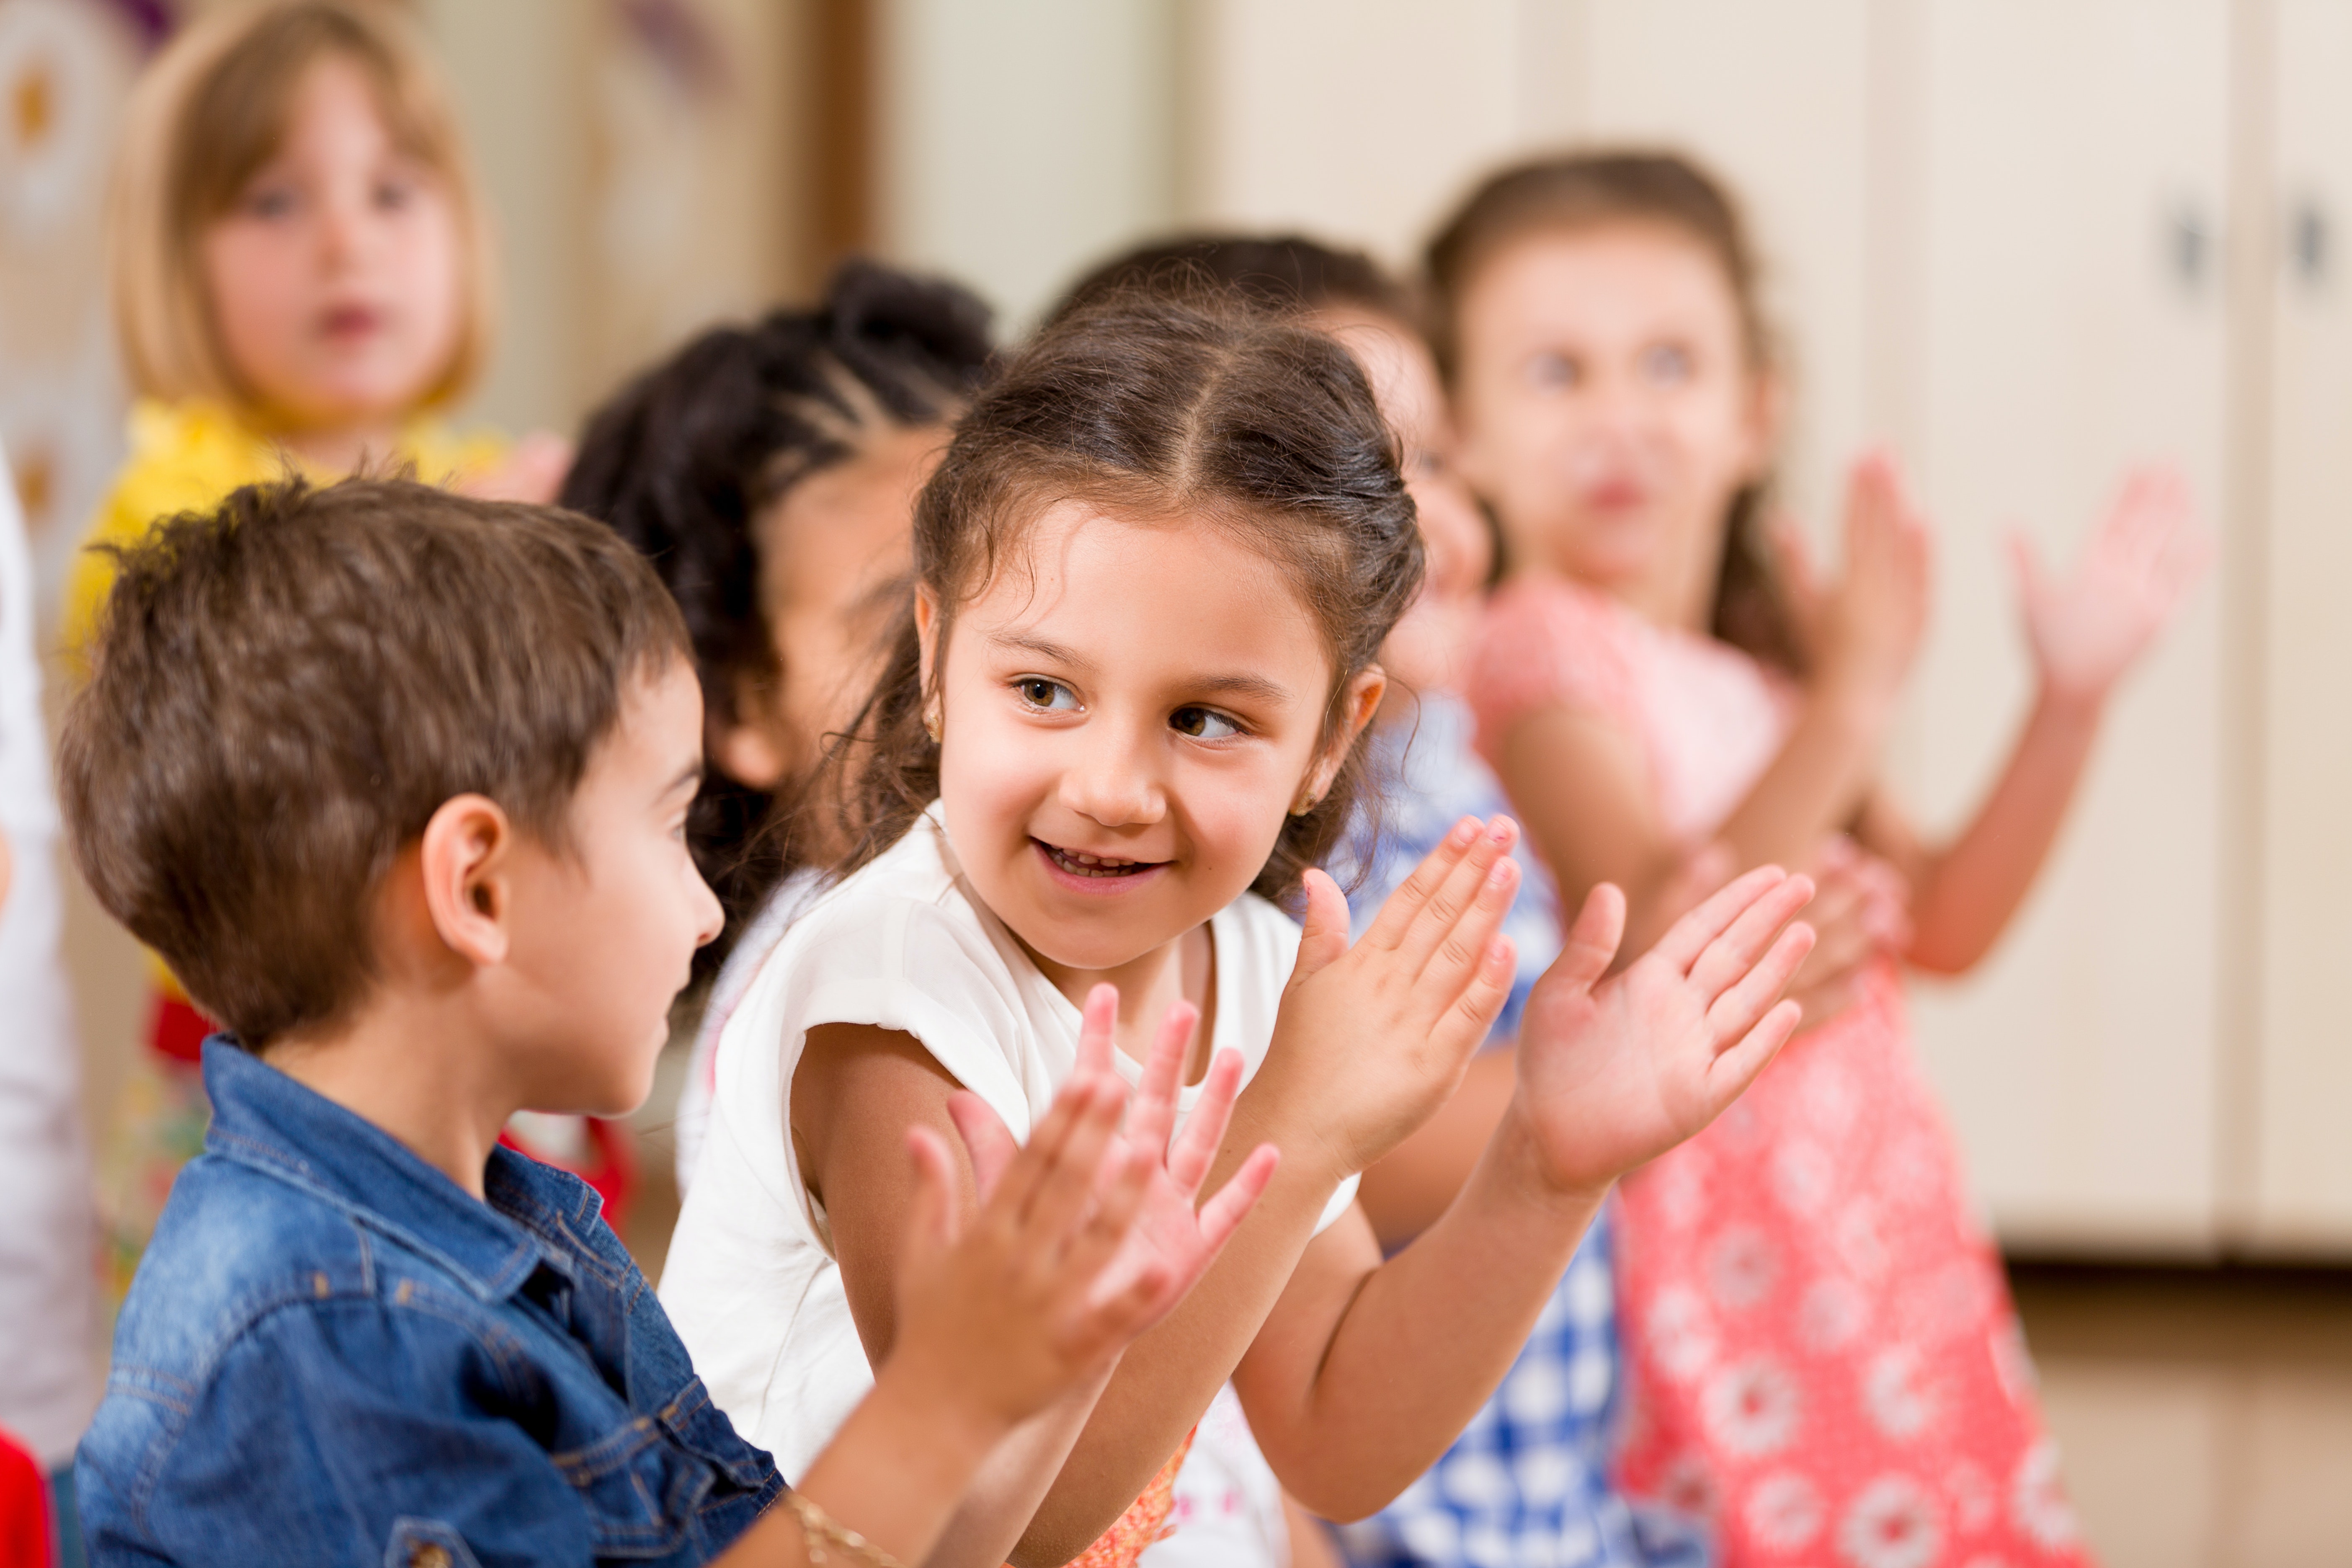 Kids likely in a childcare centre clapping hands